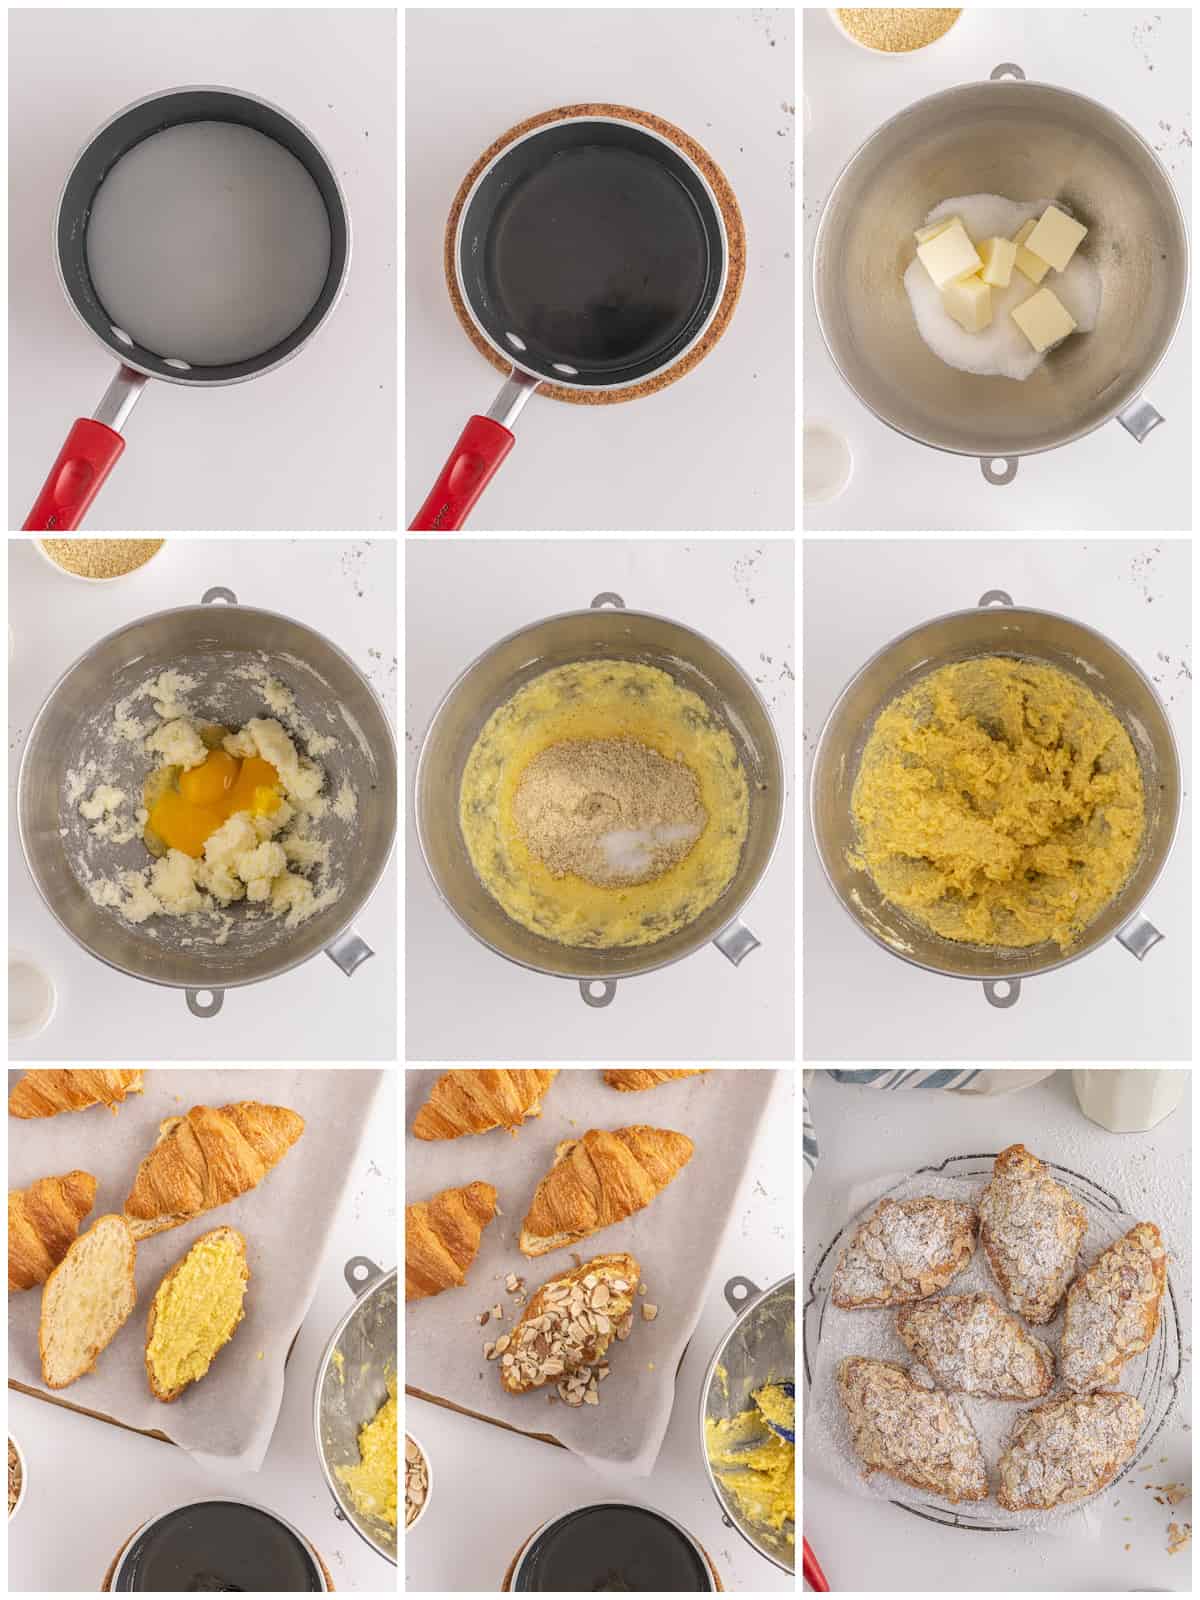 Step by step photos on how to make Almond Croissants.